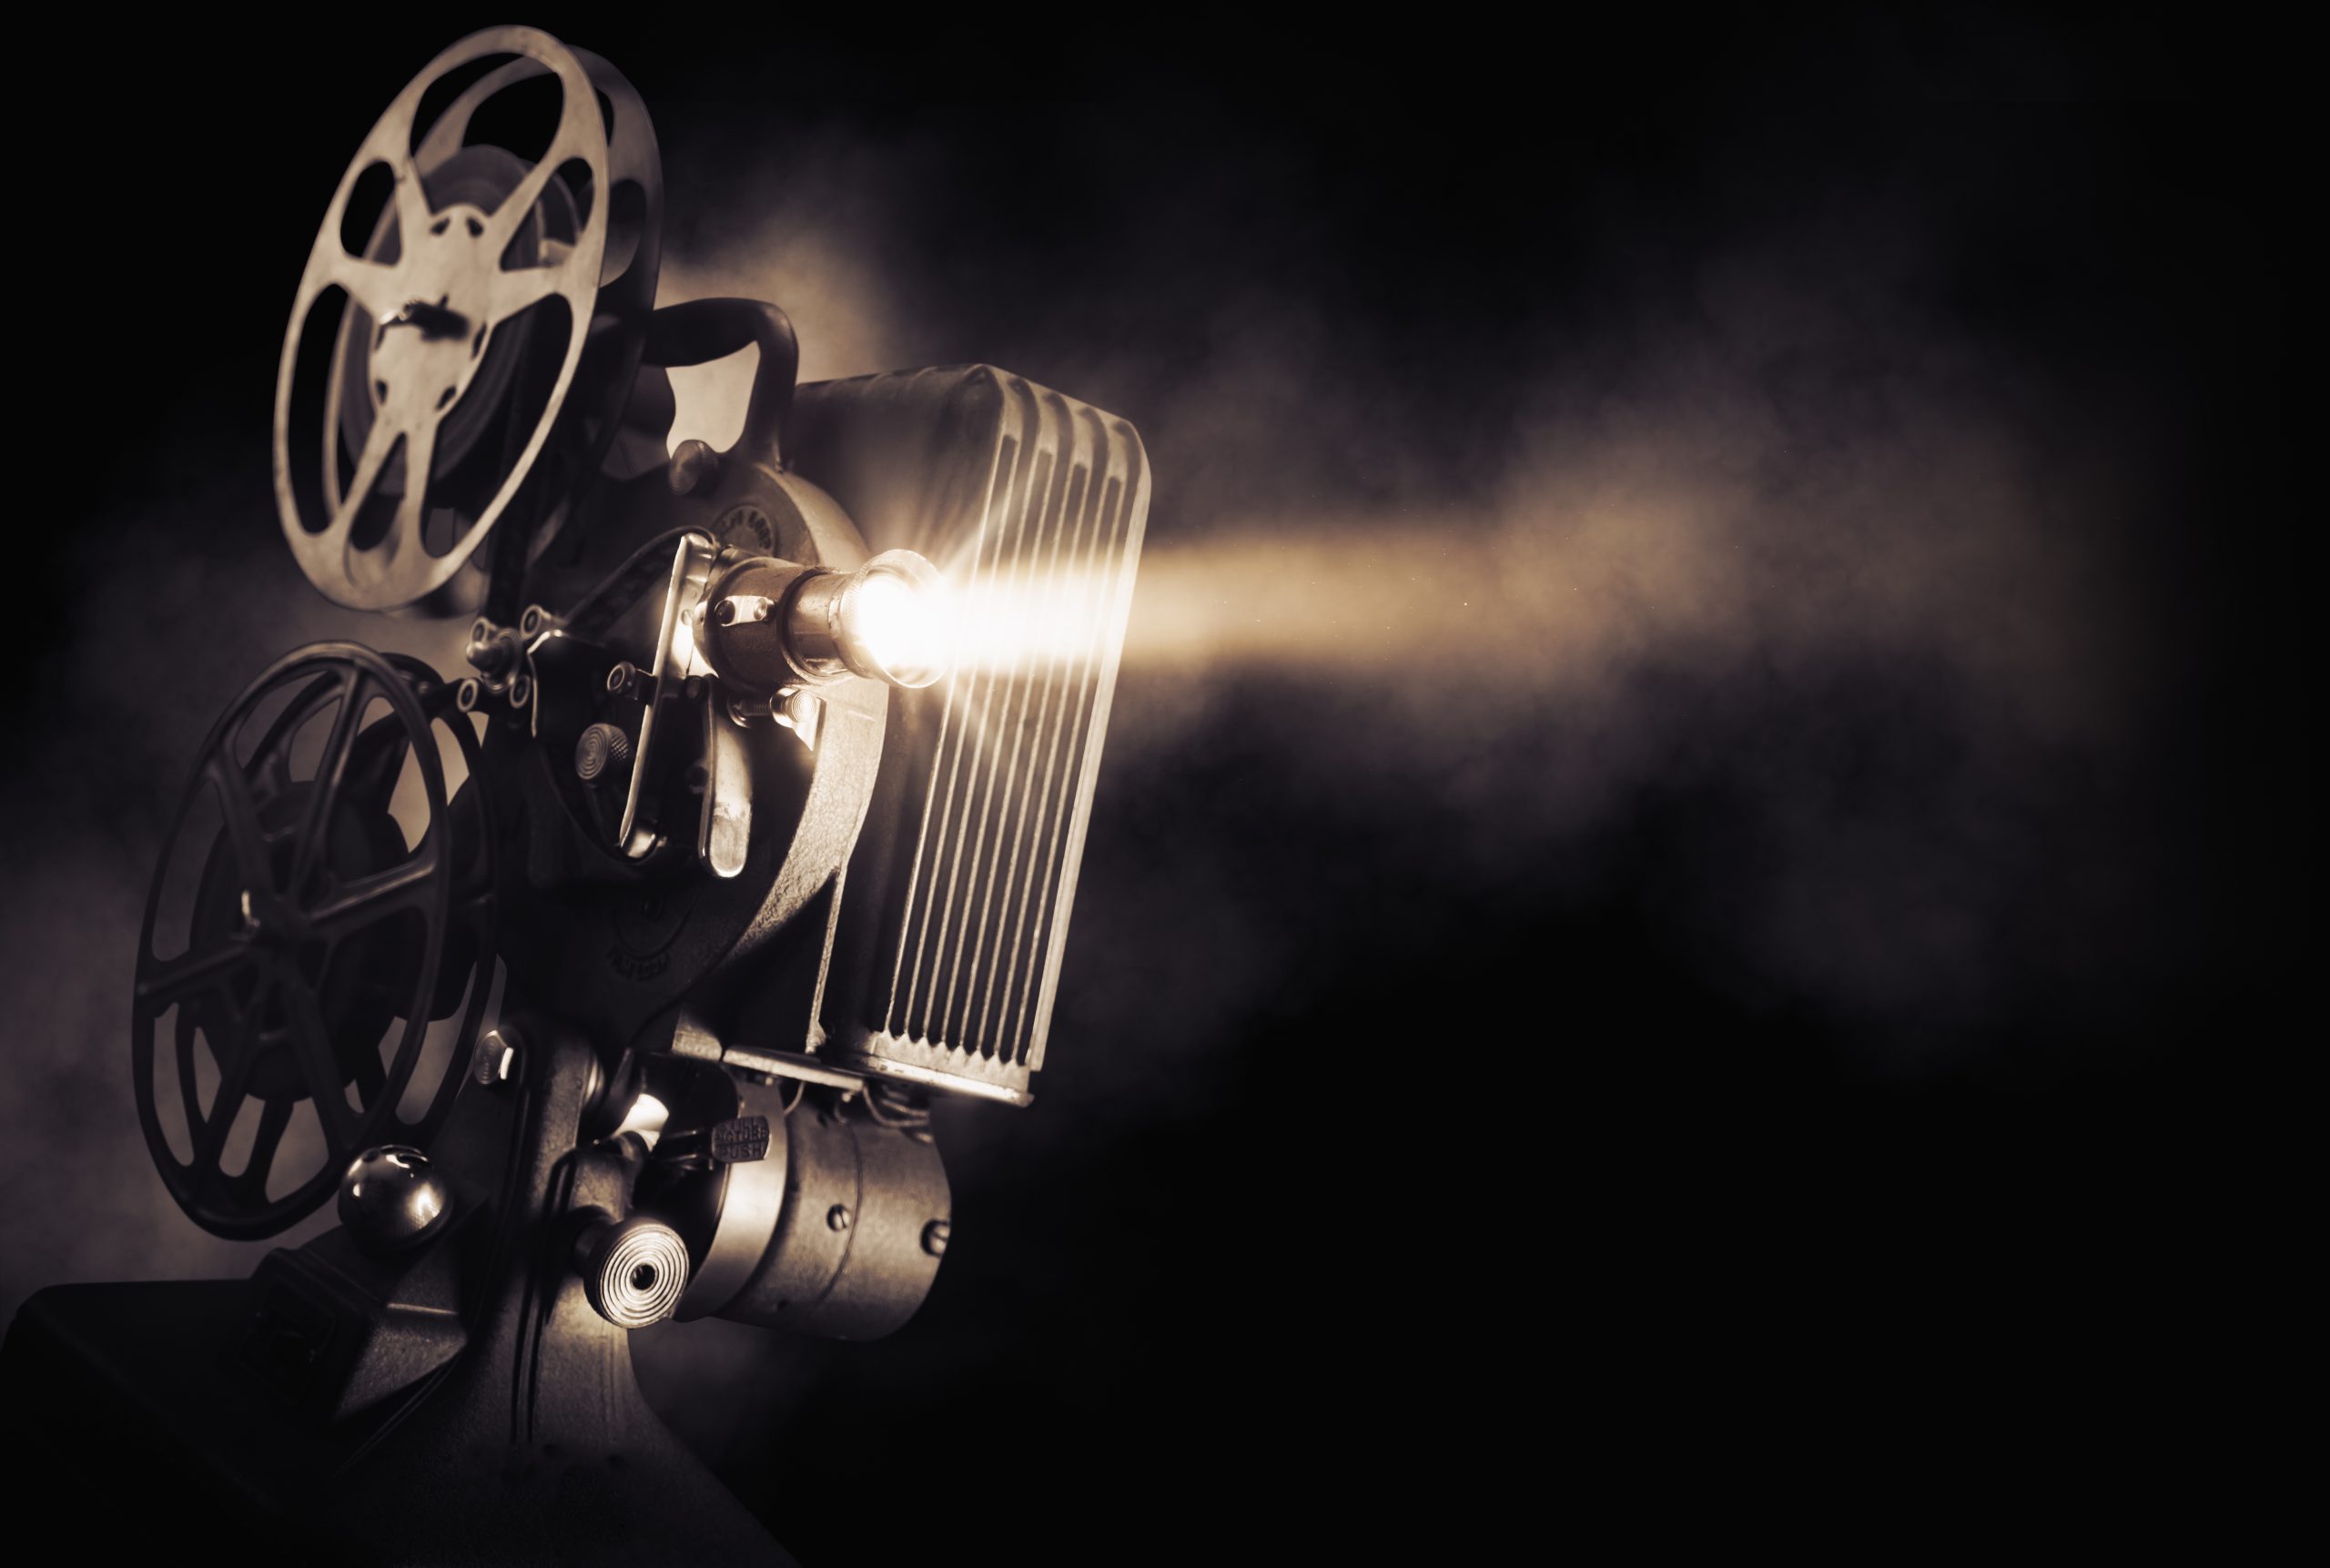 Movie,Projector,On,A,Dark,Background,With,Light,Beam,/